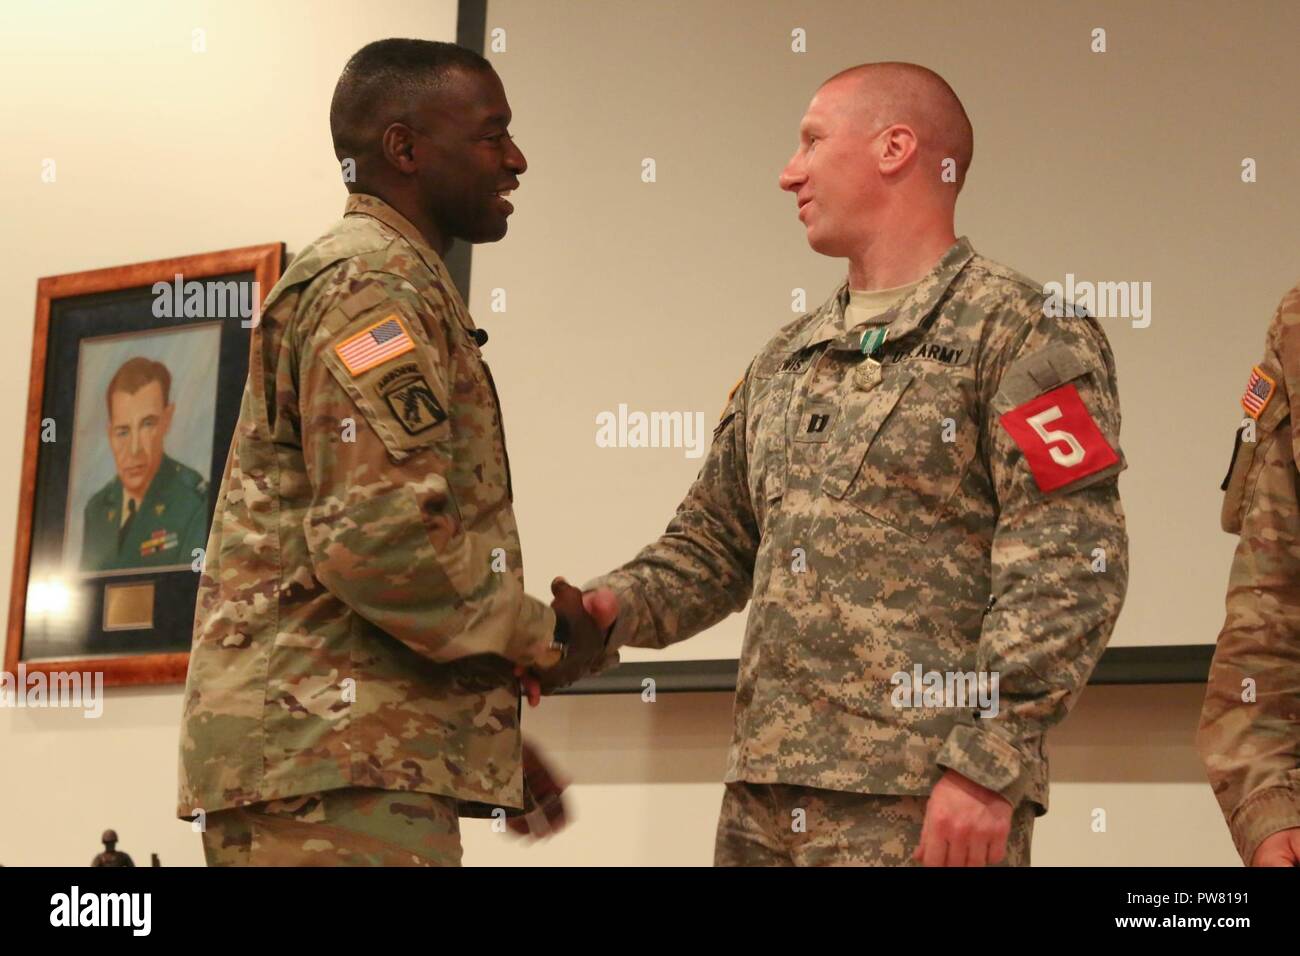 U.S. Army Brig. Gen. R. Scott Dingle of the Regional Health Command - Atlantic, congratulates Capt. Jeremy Lewis after winning the 2017 Best Medic Competition at Fort Bragg, N.C., Sept. 20, 2017. The competition tested the physical and mental toughness, as well as the technical competence, of each medic to identify the team moving forward to represent the region at the next level of the competition. Stock Photo